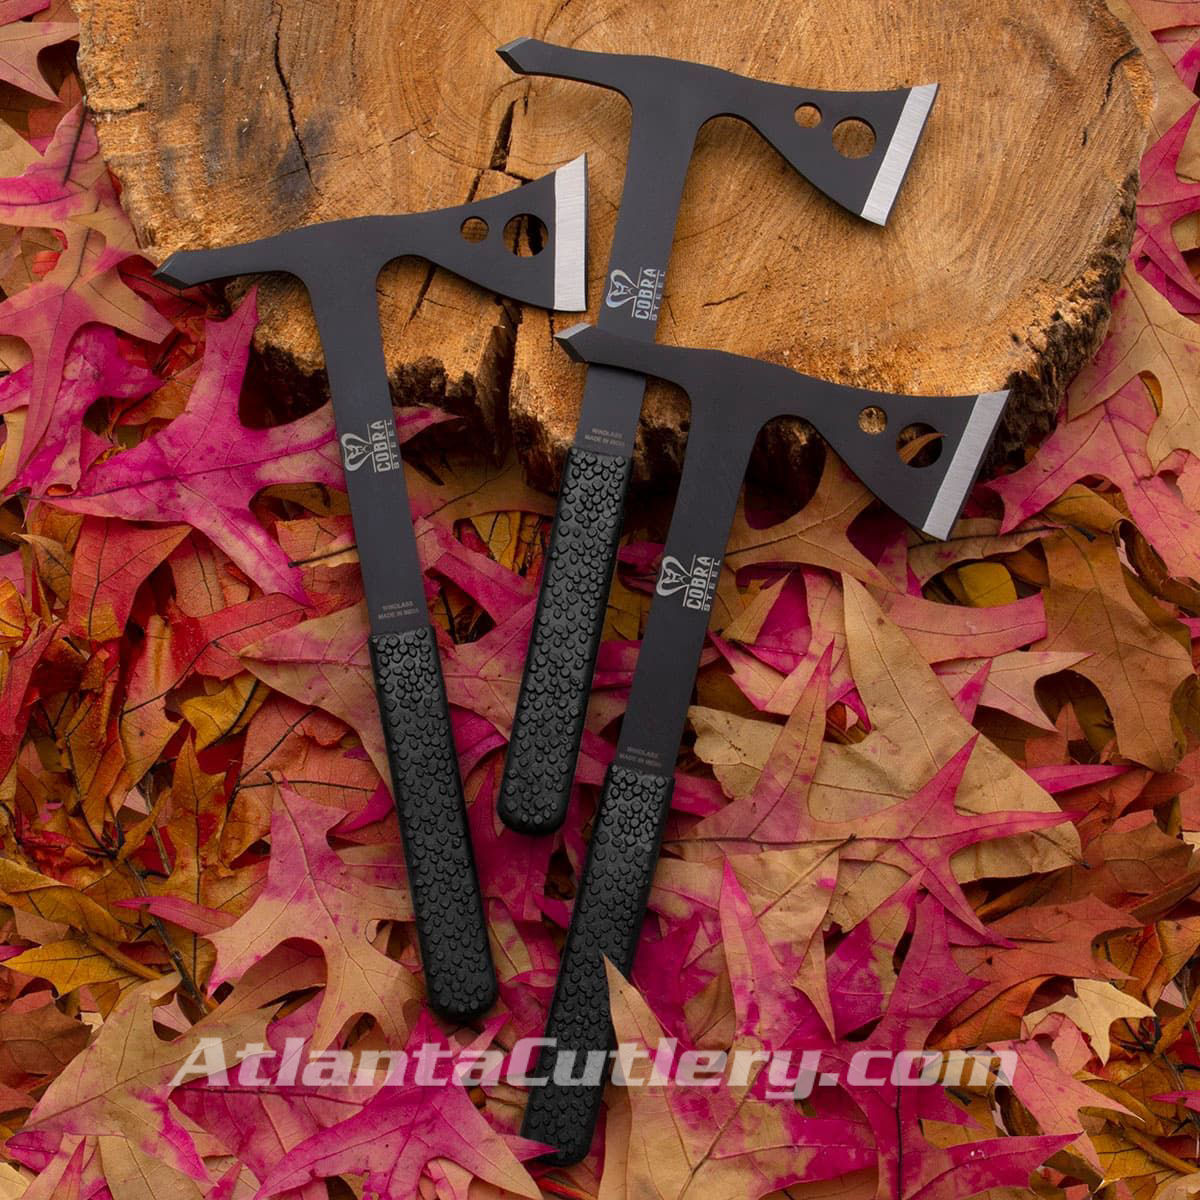 set of 3 Cobra Steel throwing axes are one piece of high carbon steel with sharpened backspikes and textured rubber grips